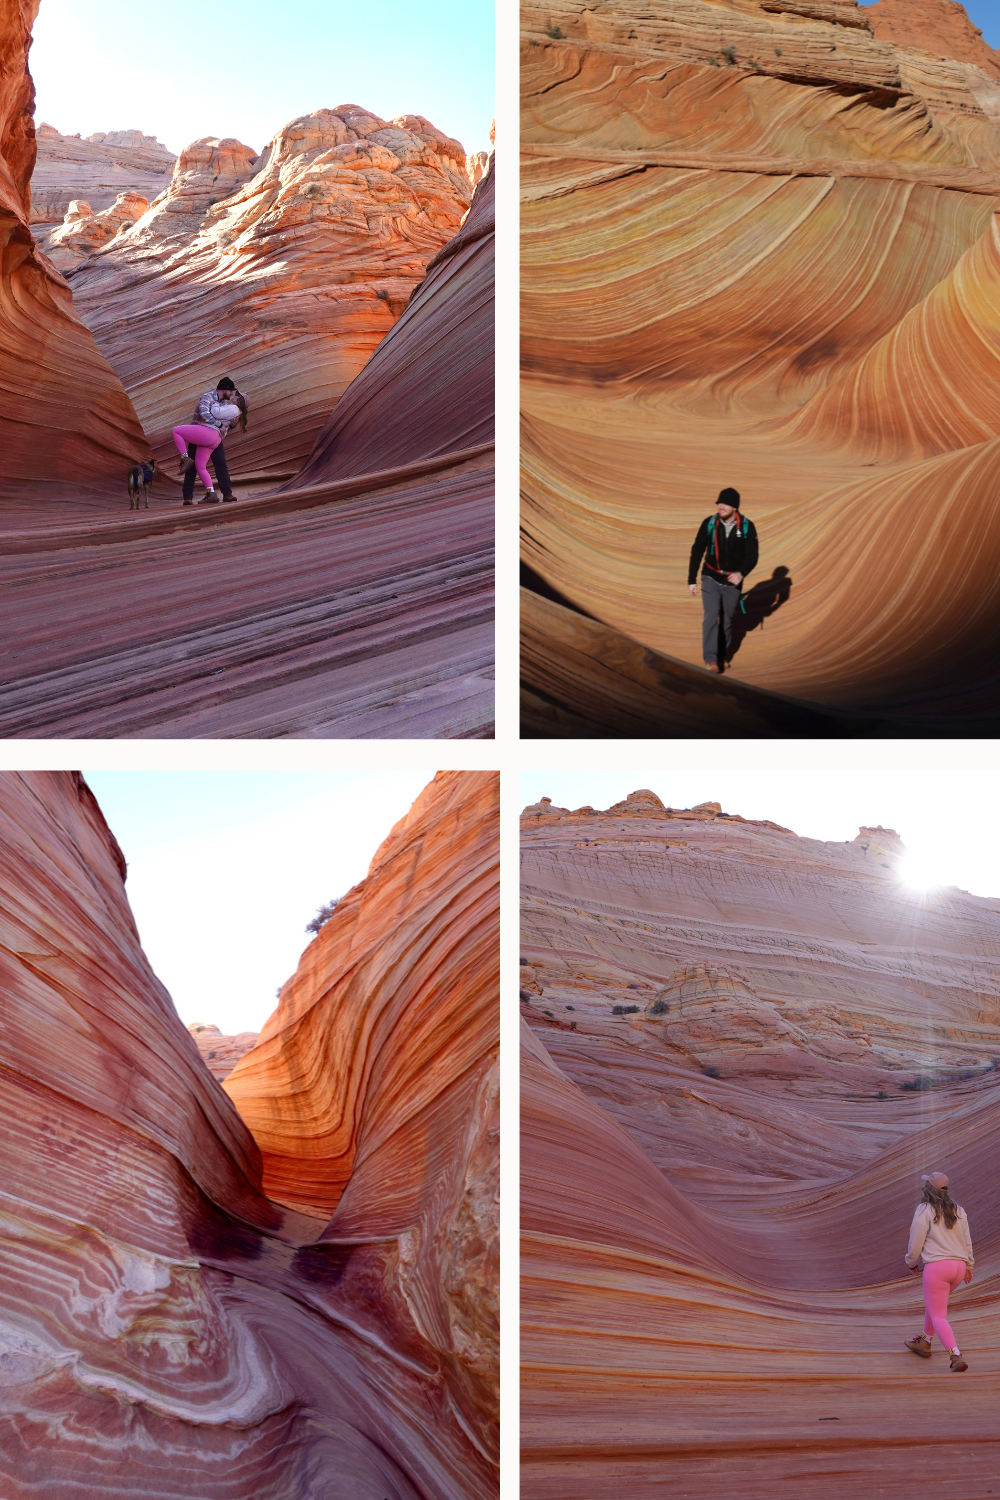 multiple photos of the wave in arizona and utah